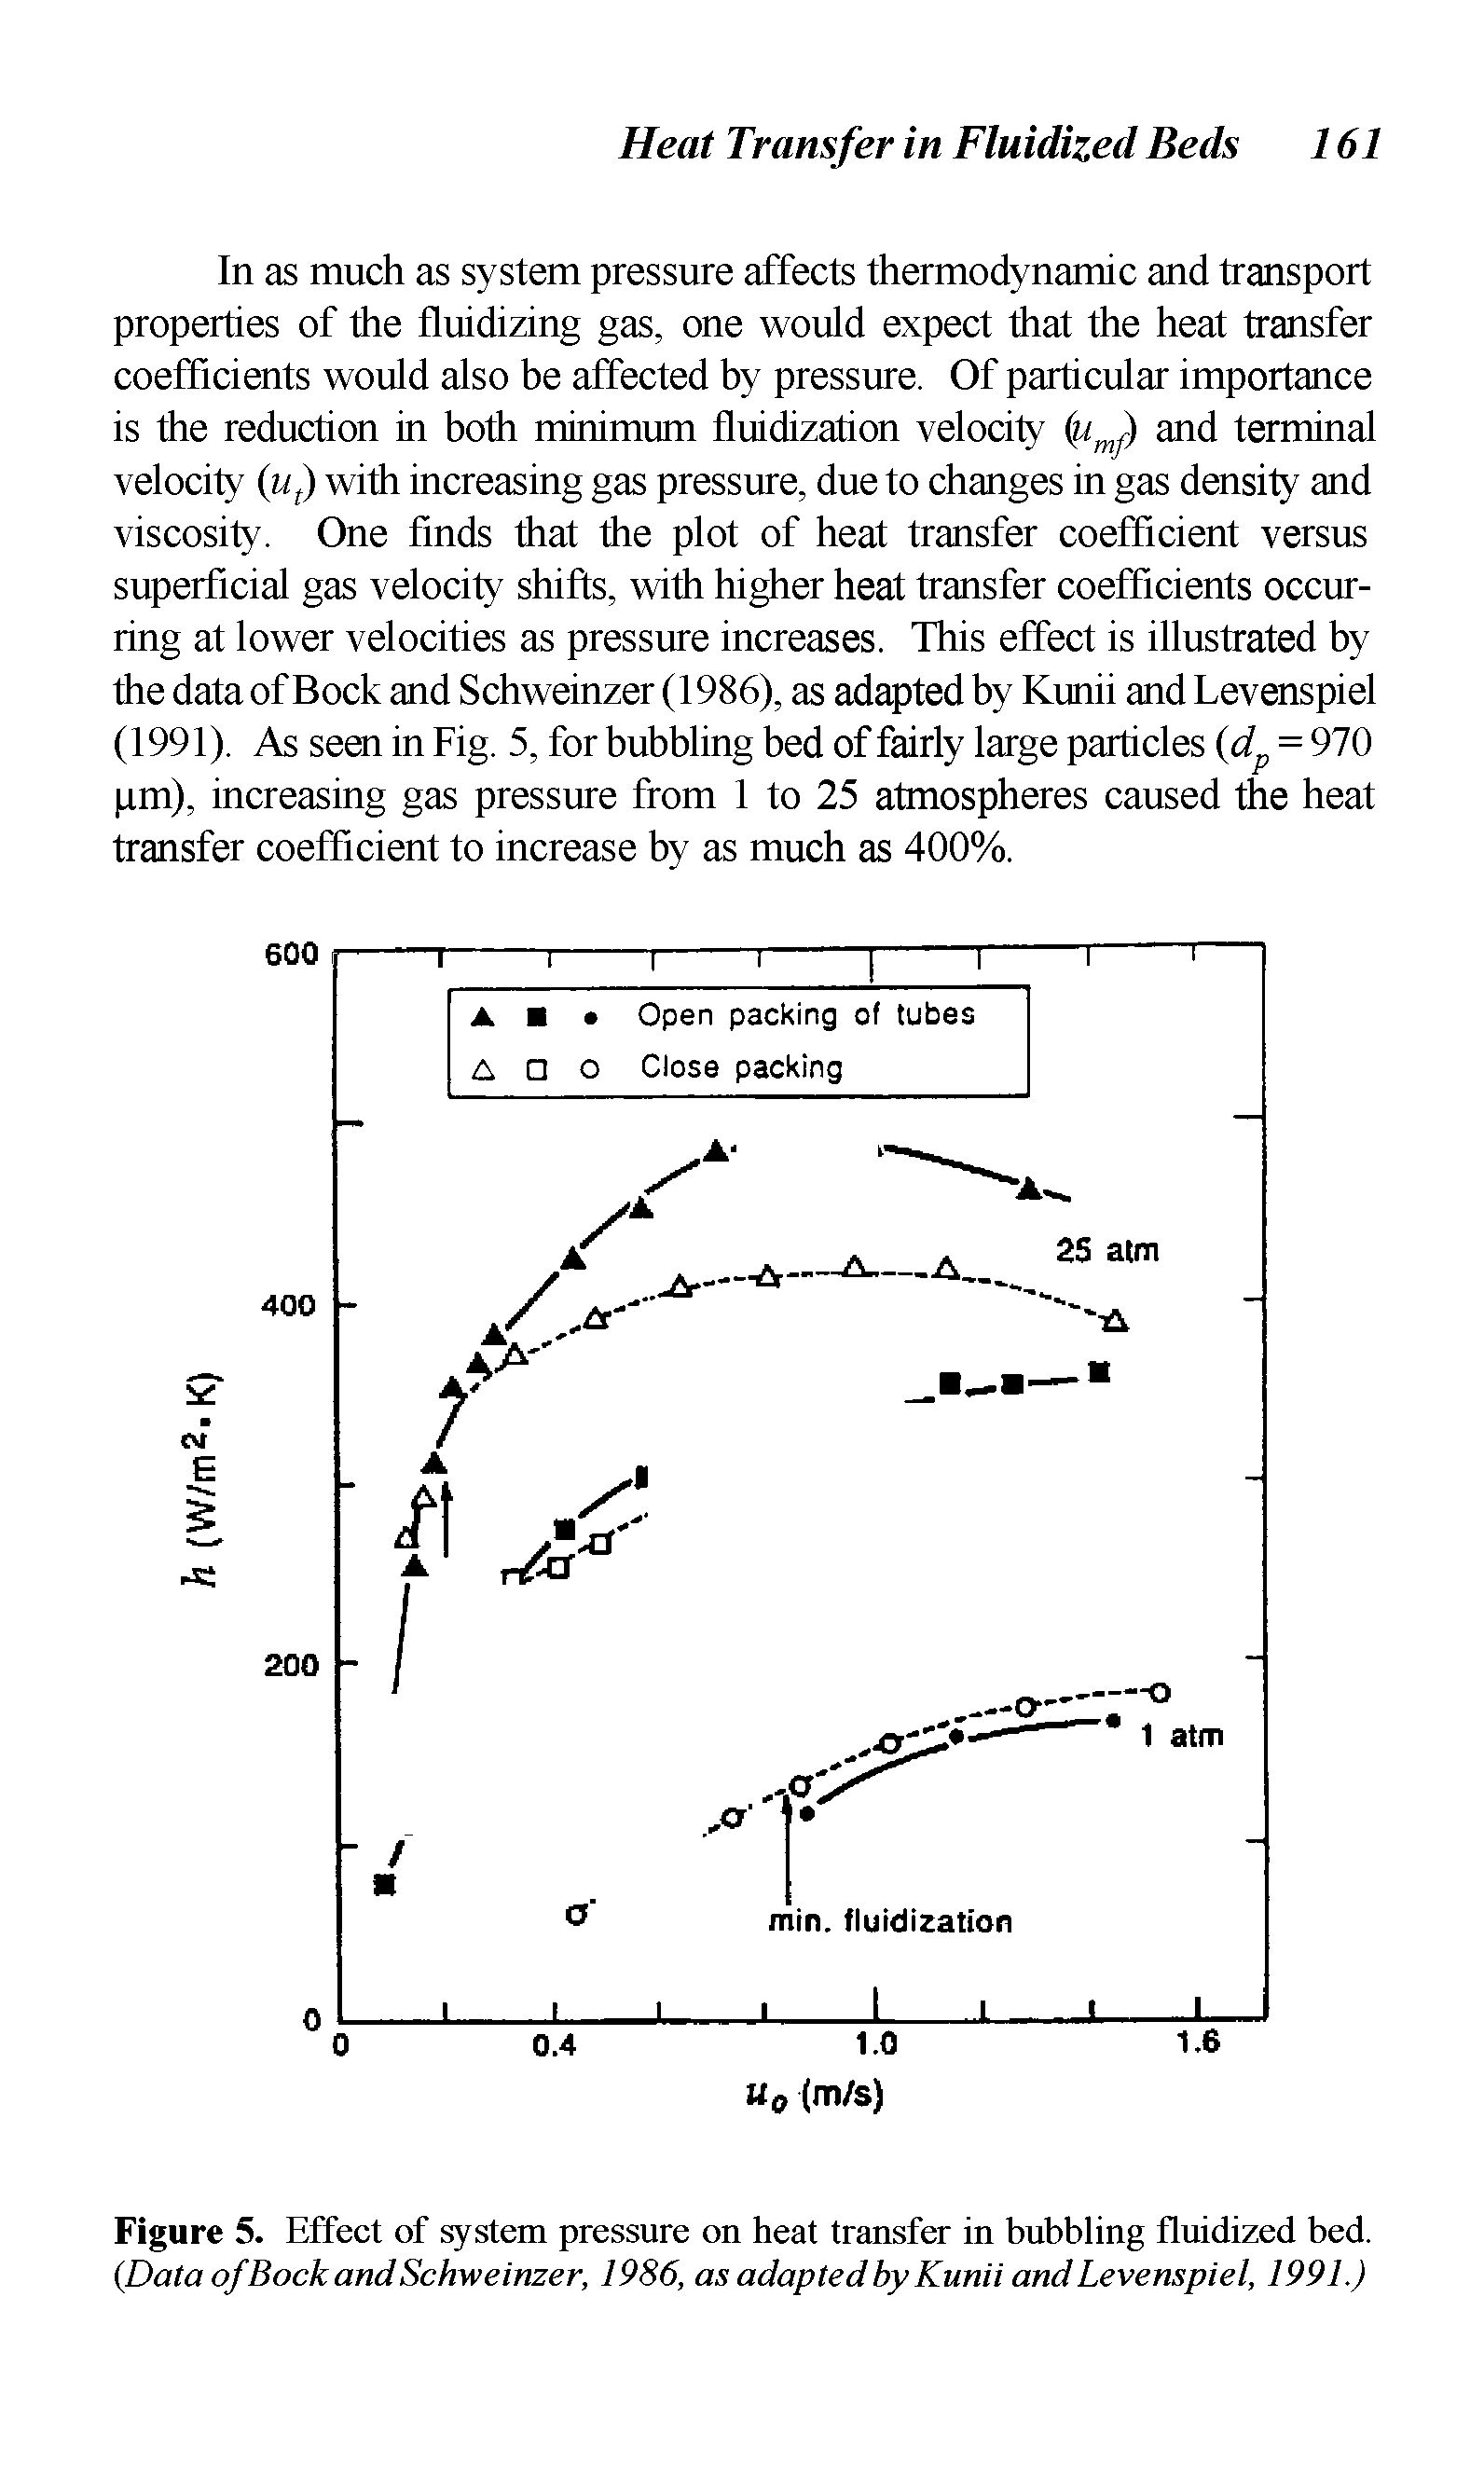 Figure 5. Effect of system pressure on heat transfer in bubbling fluidized bed. Data of Bock and Schweinzer, 1986, as adapted by Kunii and Levenspiel, 1991.)...